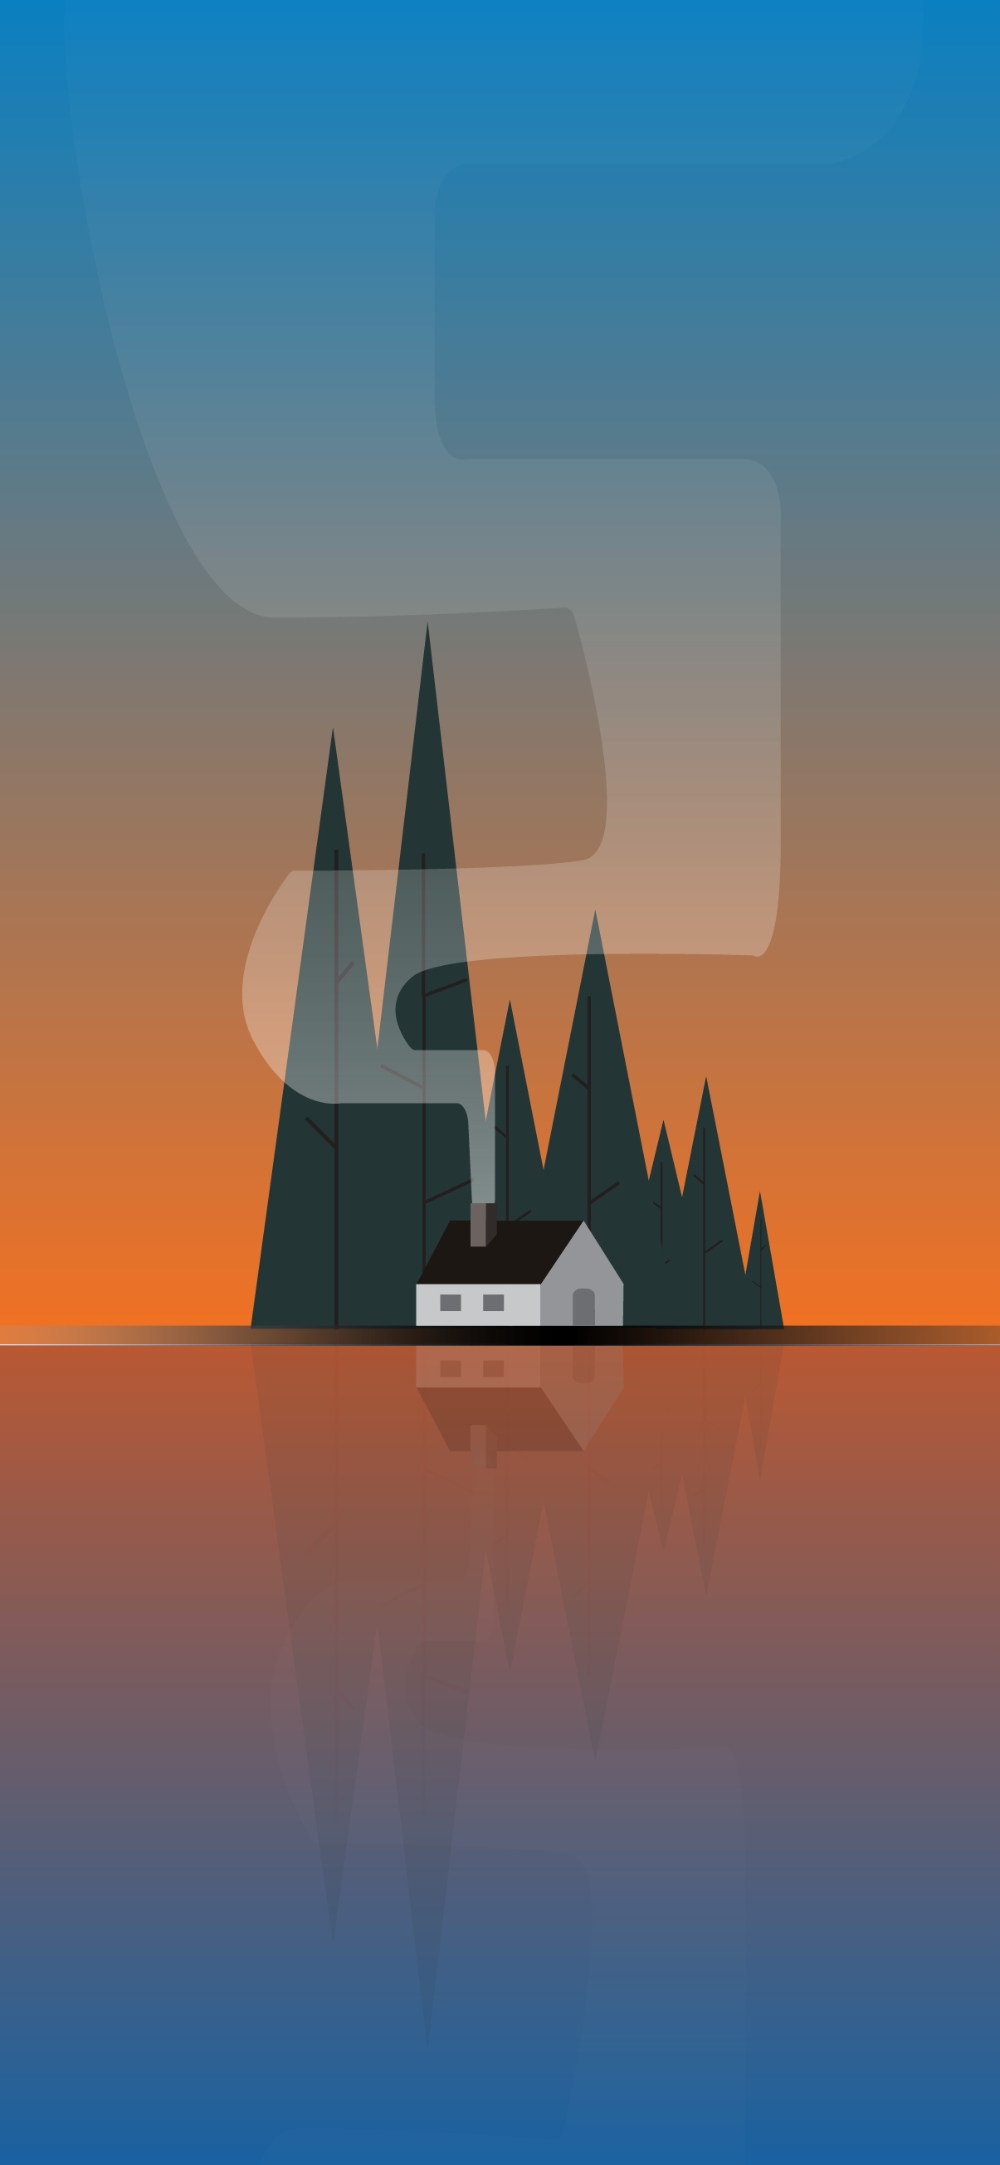 HOUSE IN THE LAKE WALLPAPERS. HeroScreen Wallpaper. Minimalist wallpaper, Wallpaper, Cool wallpaper